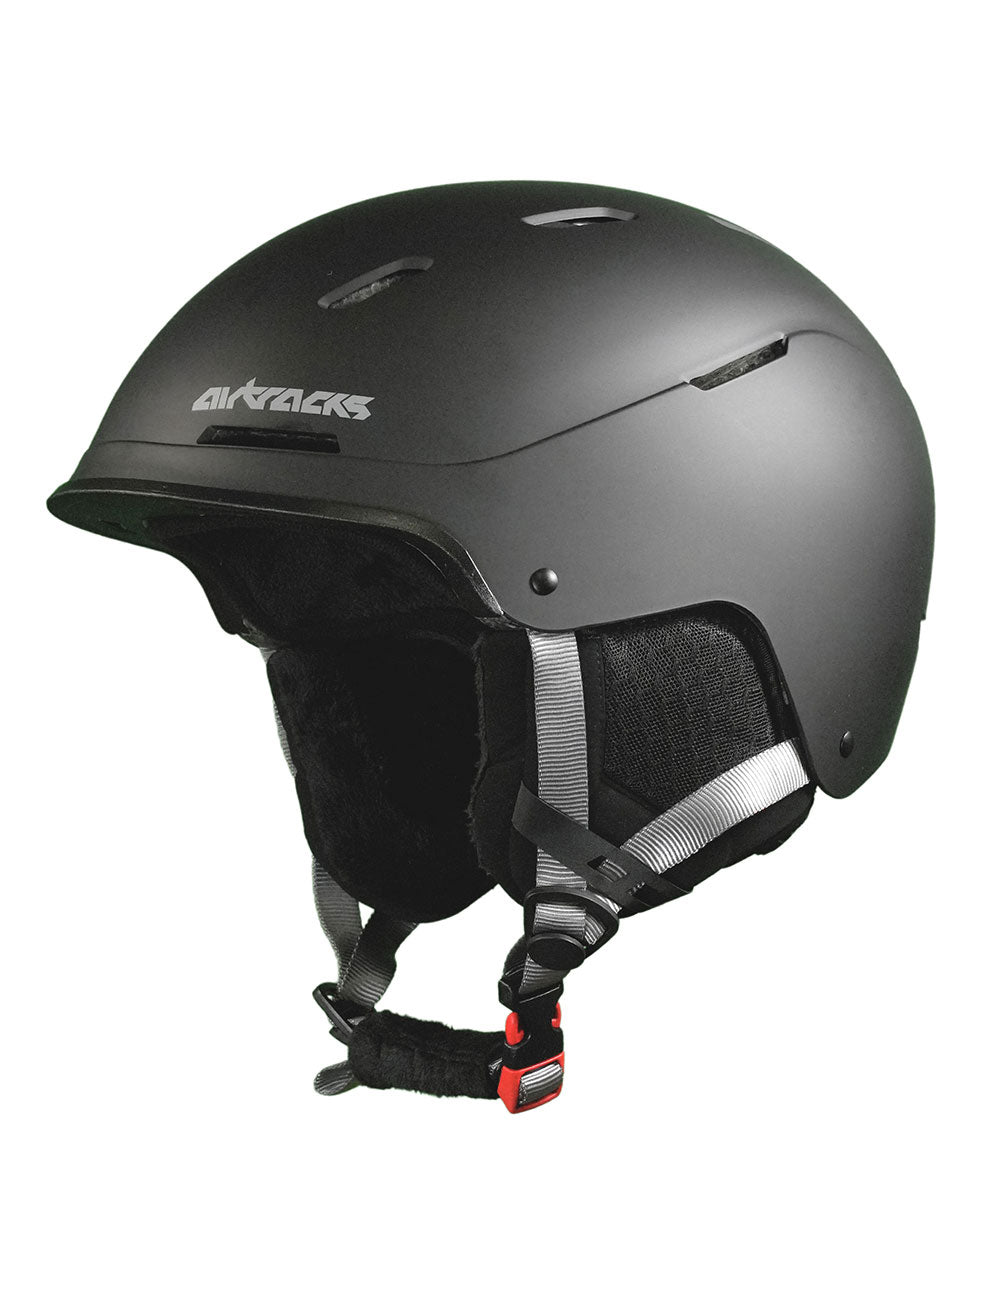 Strong_SB_Helm_sps2101_1300_4